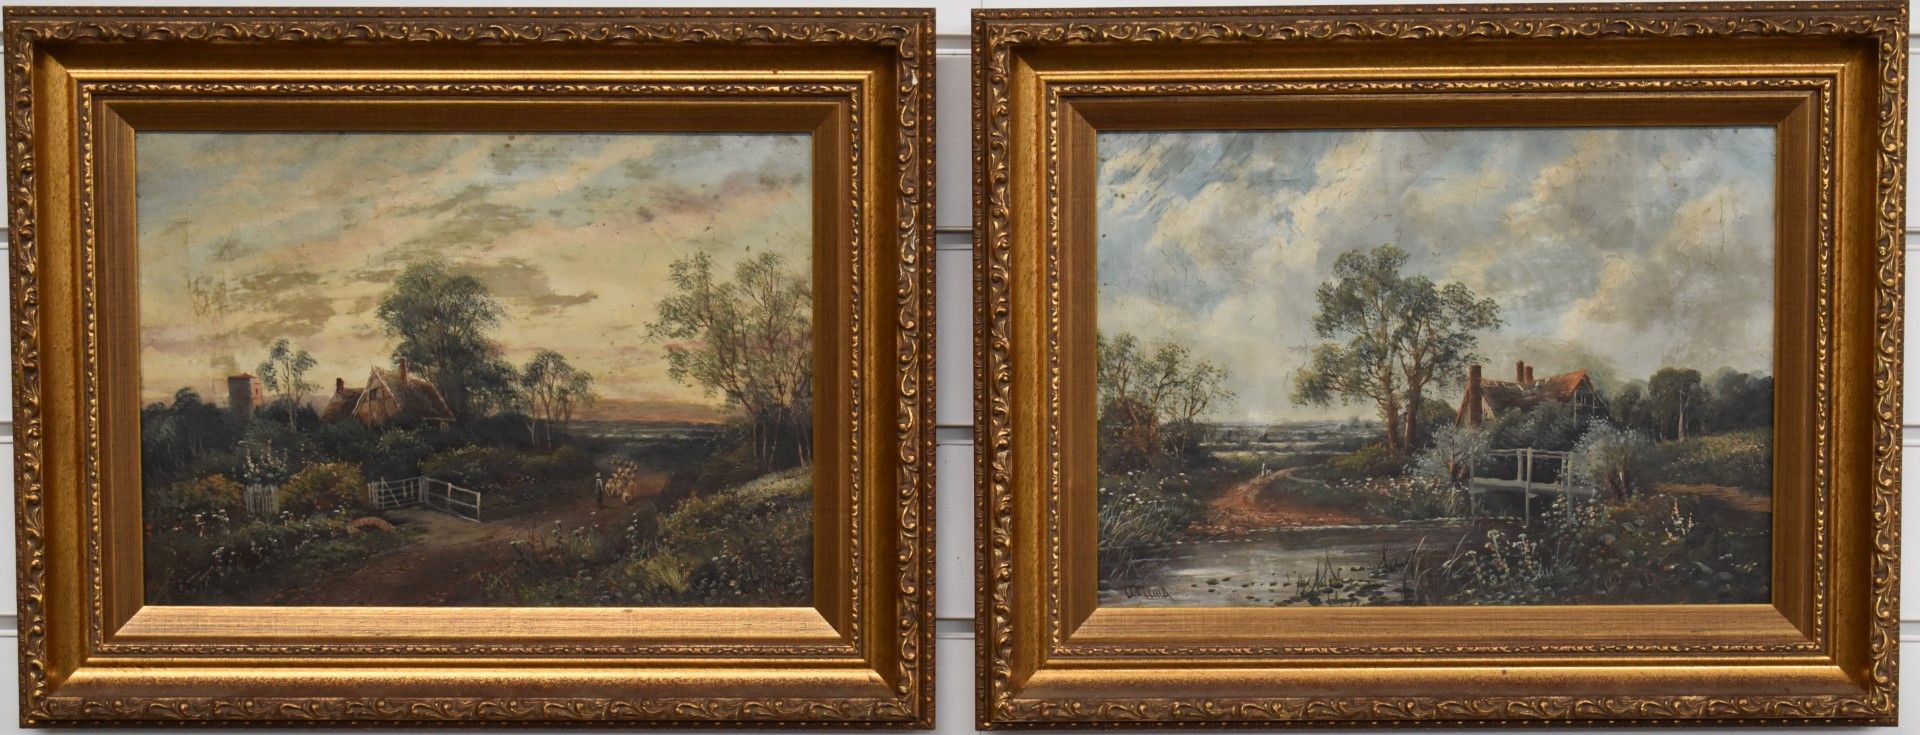 Pair of oil on canvas landscapes, both indistinctly signed, 24 x 34cm, in gilt frames